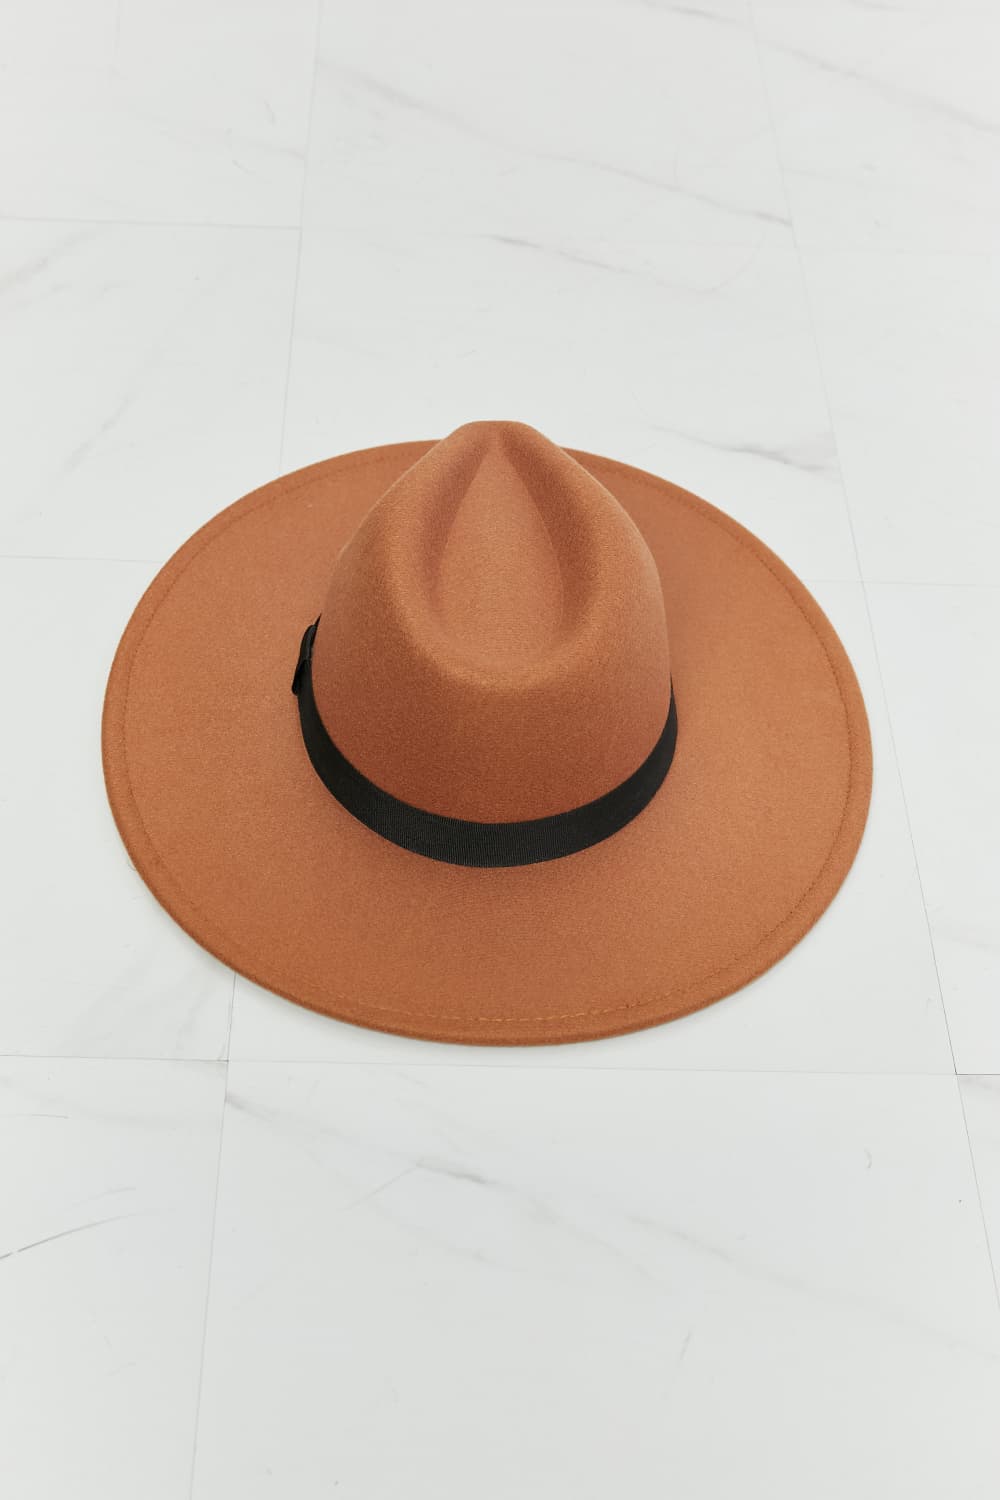 Fame Enjoy The Simple Things Fedora Hat - Cheeky Chic Boutique